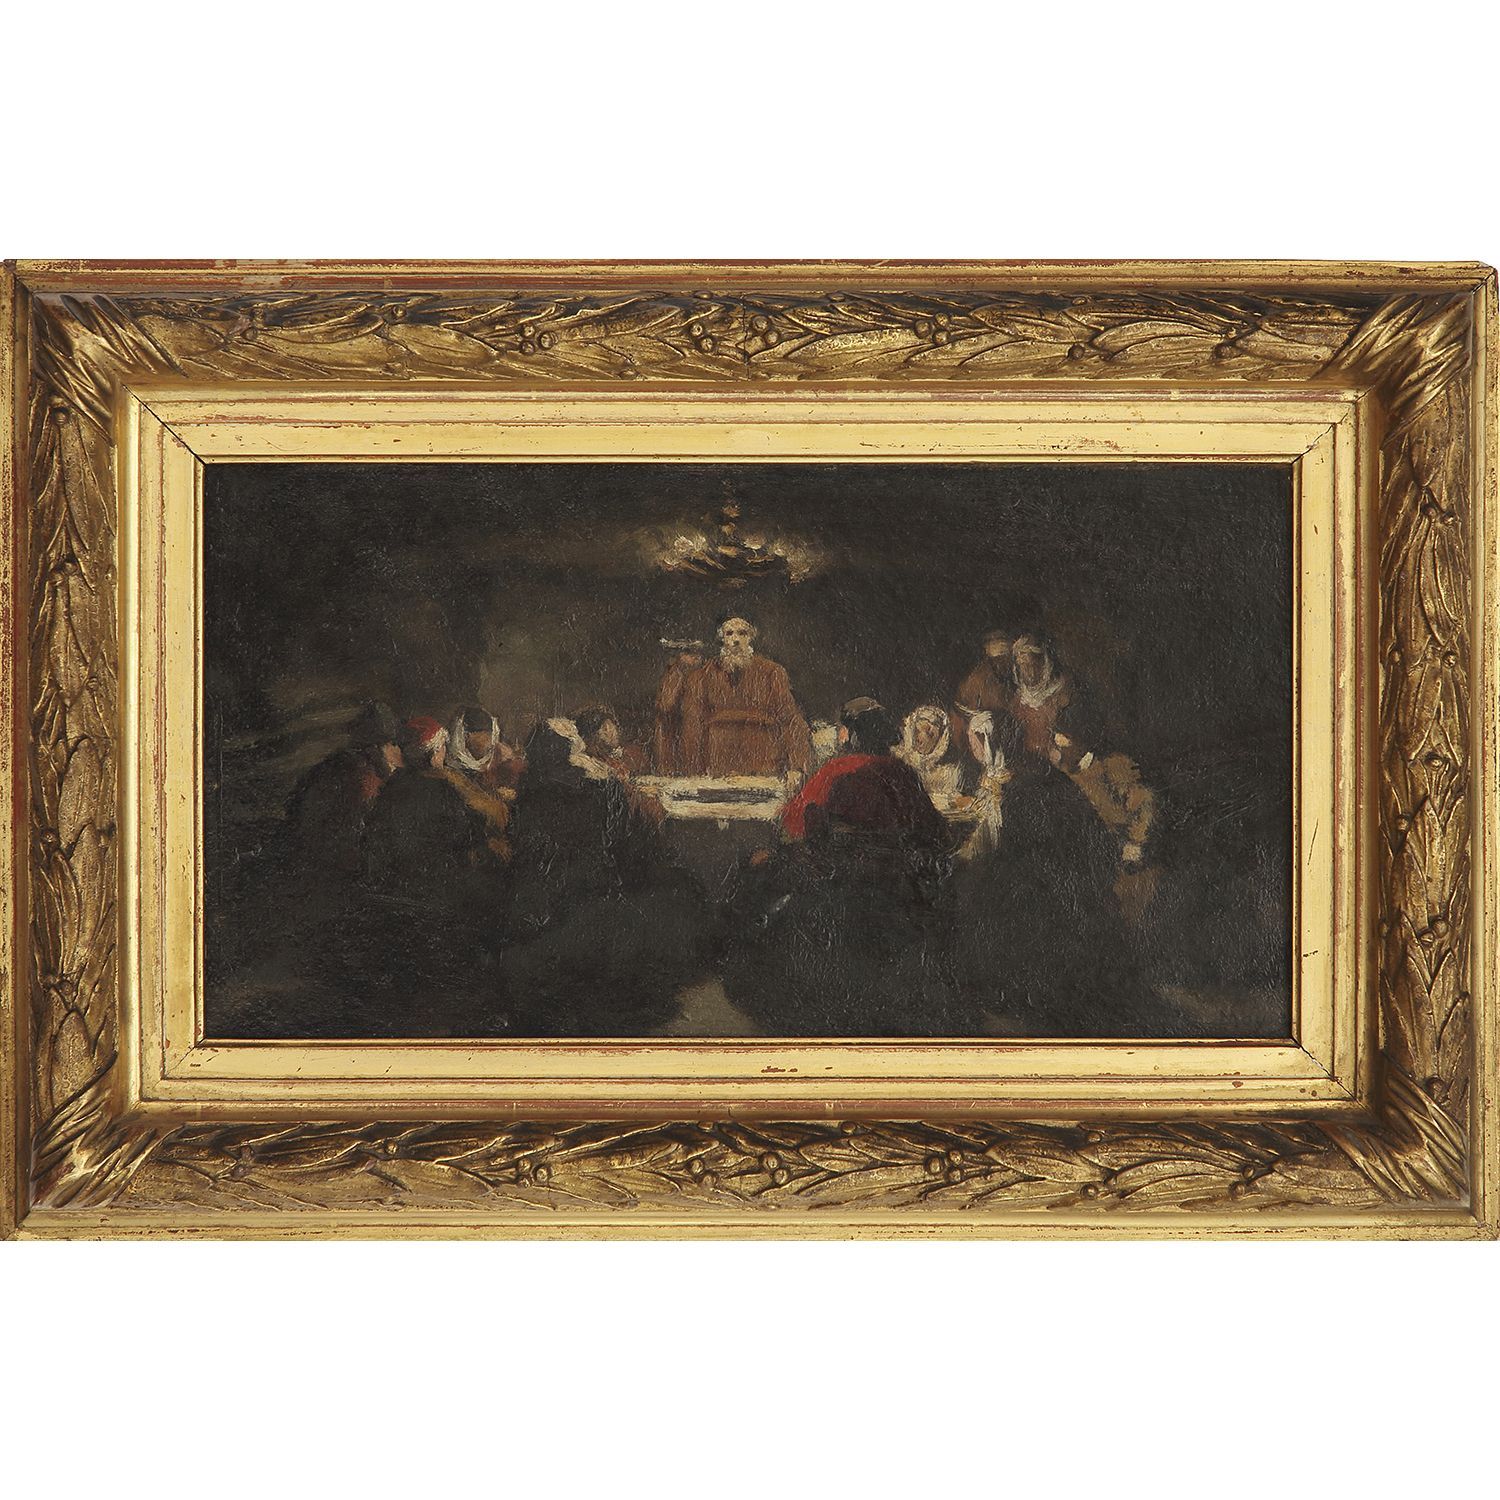 Null EDOUARD MOYSE (1827-1908)

SEDER OR A JEWISH PASSOVER IN THE MIDDLE AGES, C&hellip;